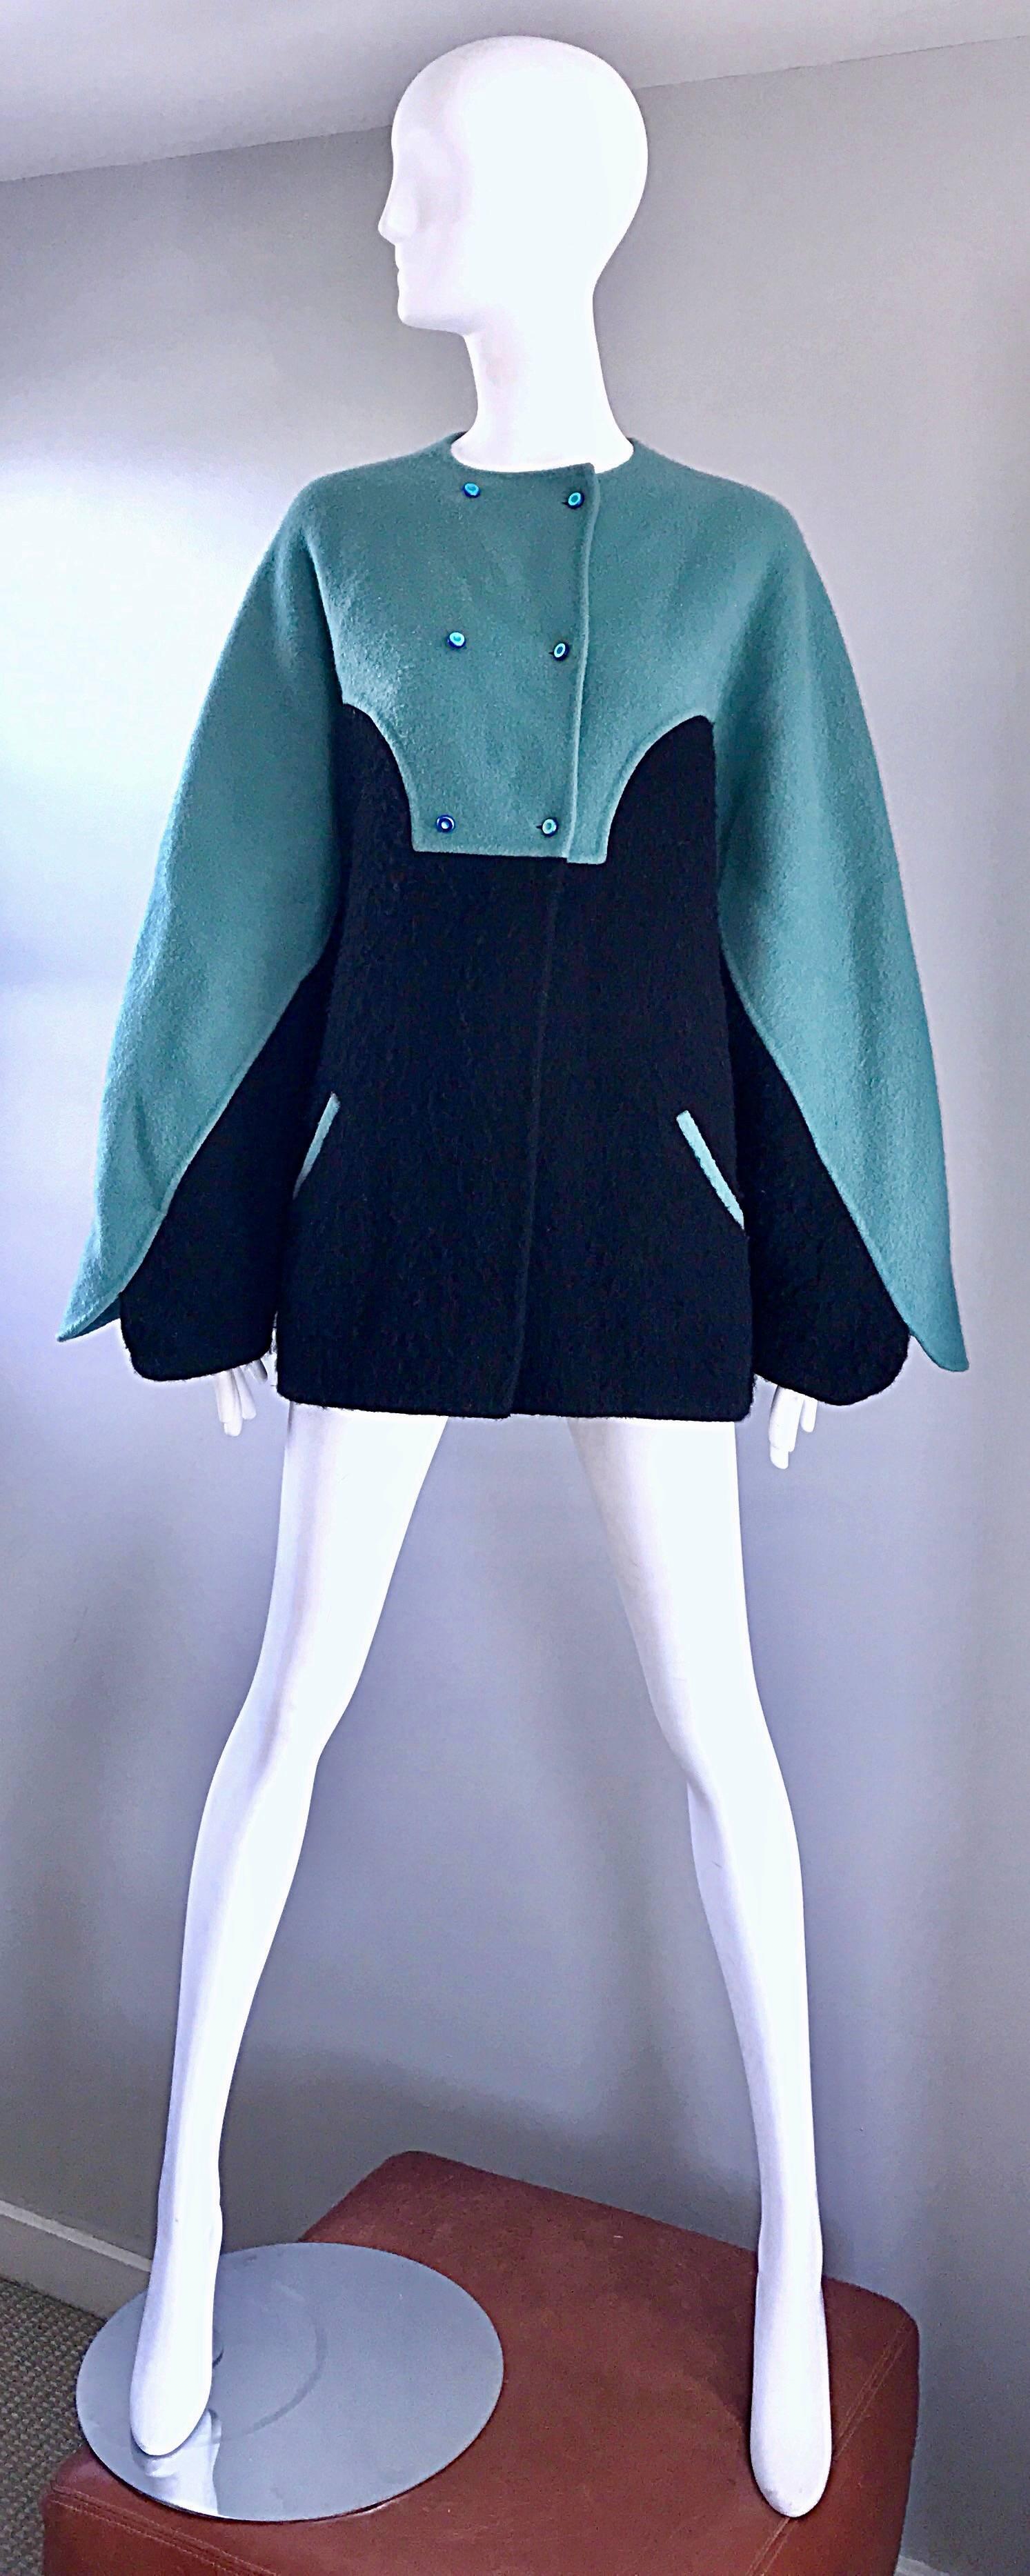 Amazing and important 1980s GEOFFREY BEENE teal aqua blue and black color block boiled wool swing jacket (almost looks like a cape ) ! Incredible amount of detail on this beauty, including hand-sewn workmanship. Small iridescent blue buttons at the